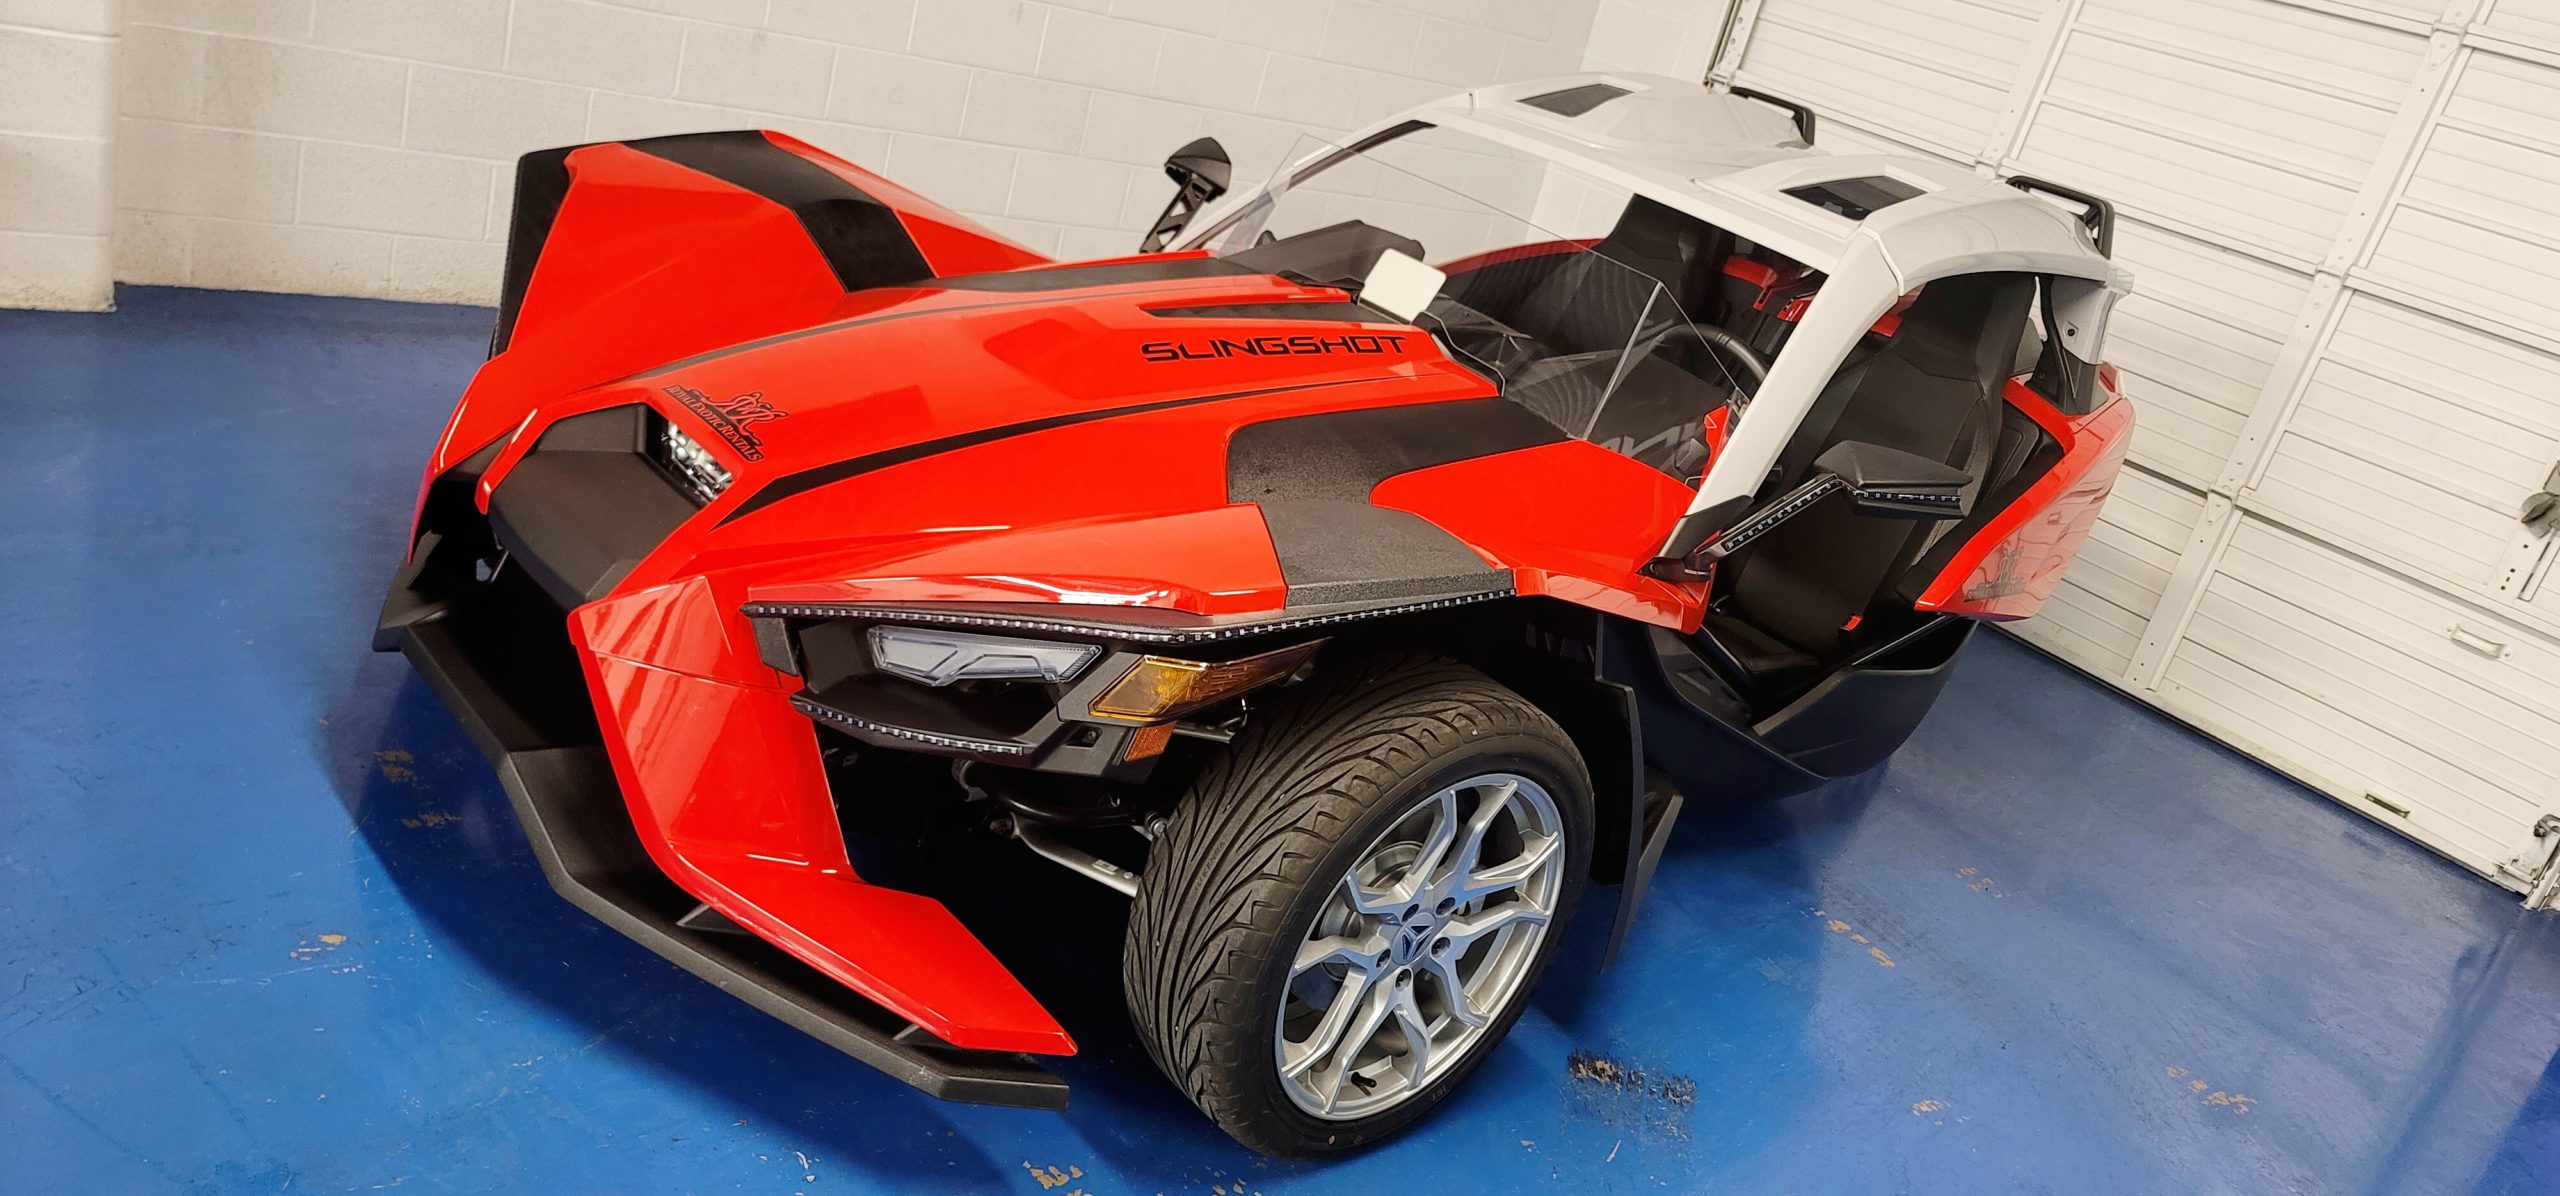 RED SlingShot-Automatic Royal Exotic